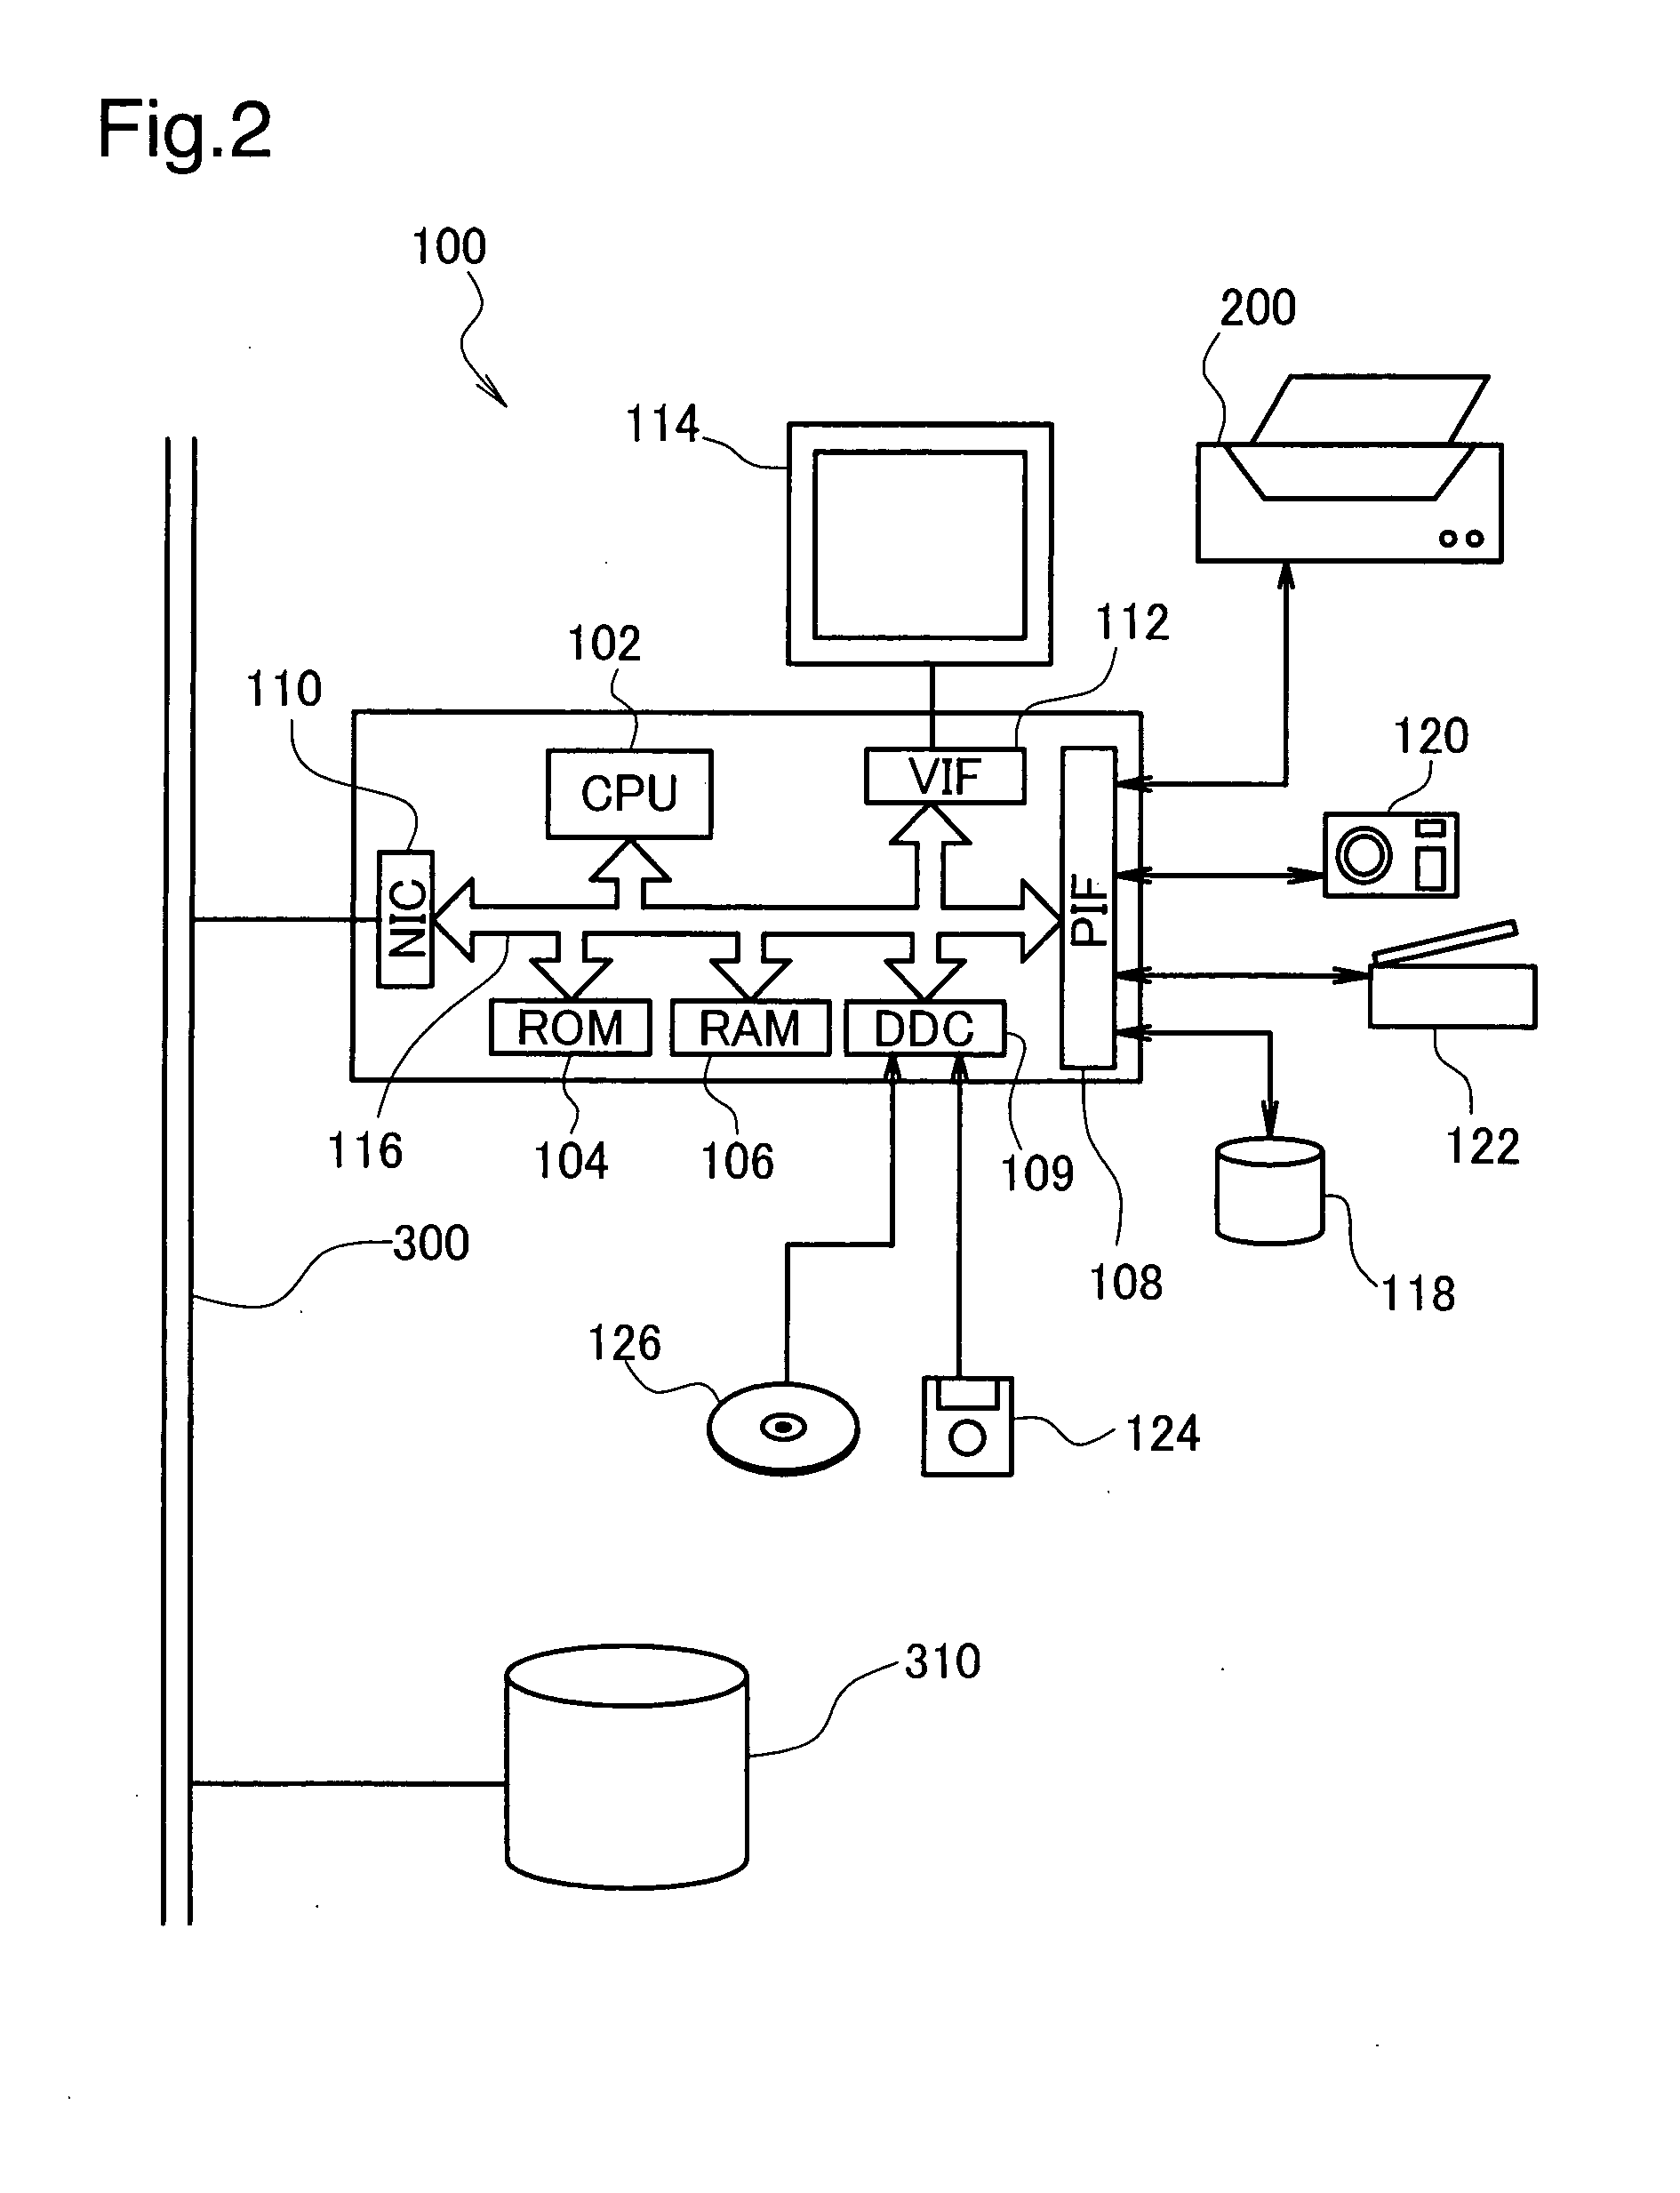 Image processing device and printing apparatus for performing bidirectional printing